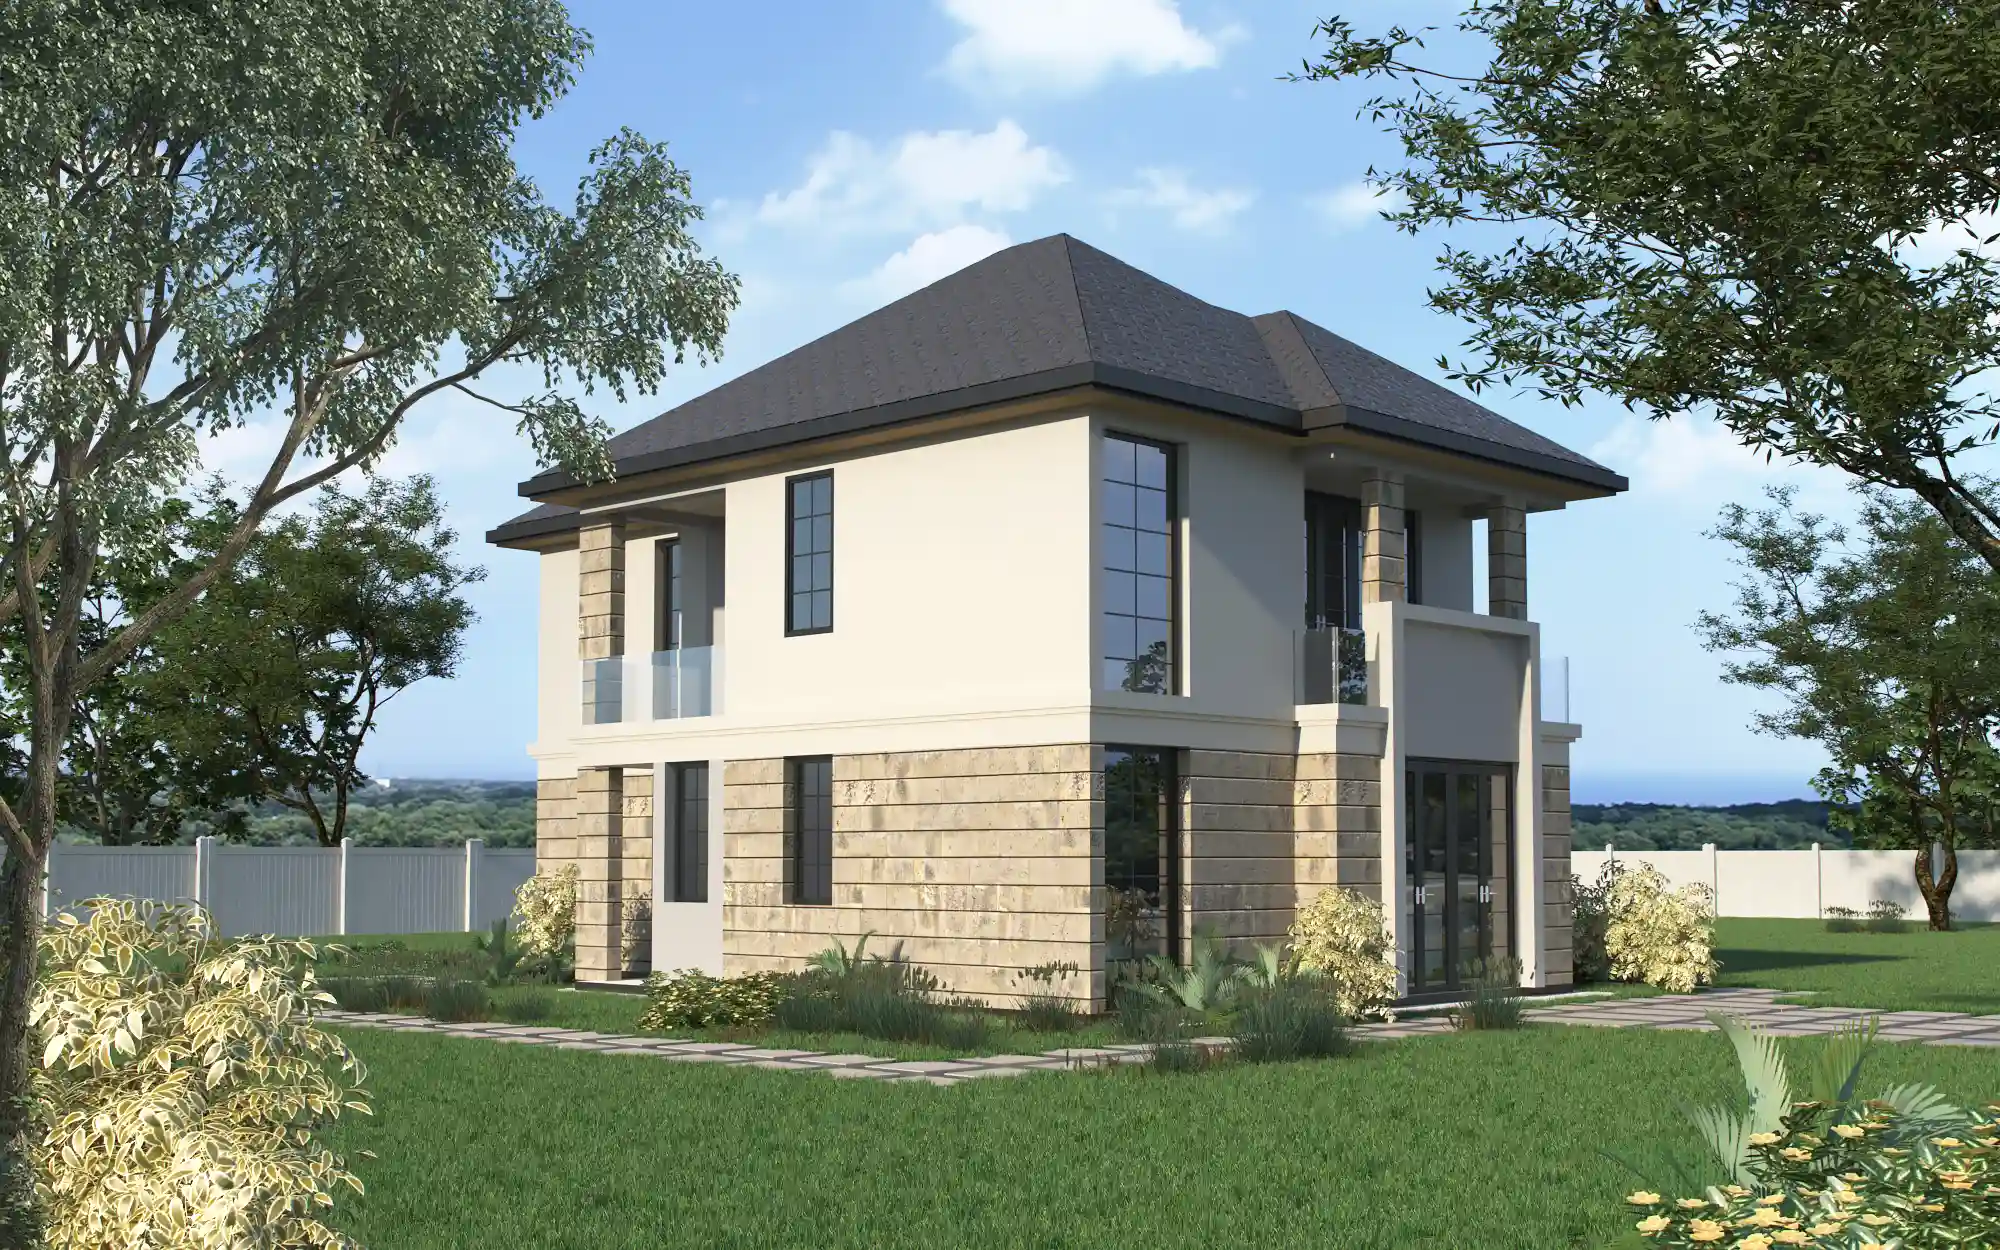 4 Bedroom  Maisonette- ID 42111 - Rear Image from Inuua Tujenge house plans with 4 bedrooms and 4 bathrooms. ( maisonette )